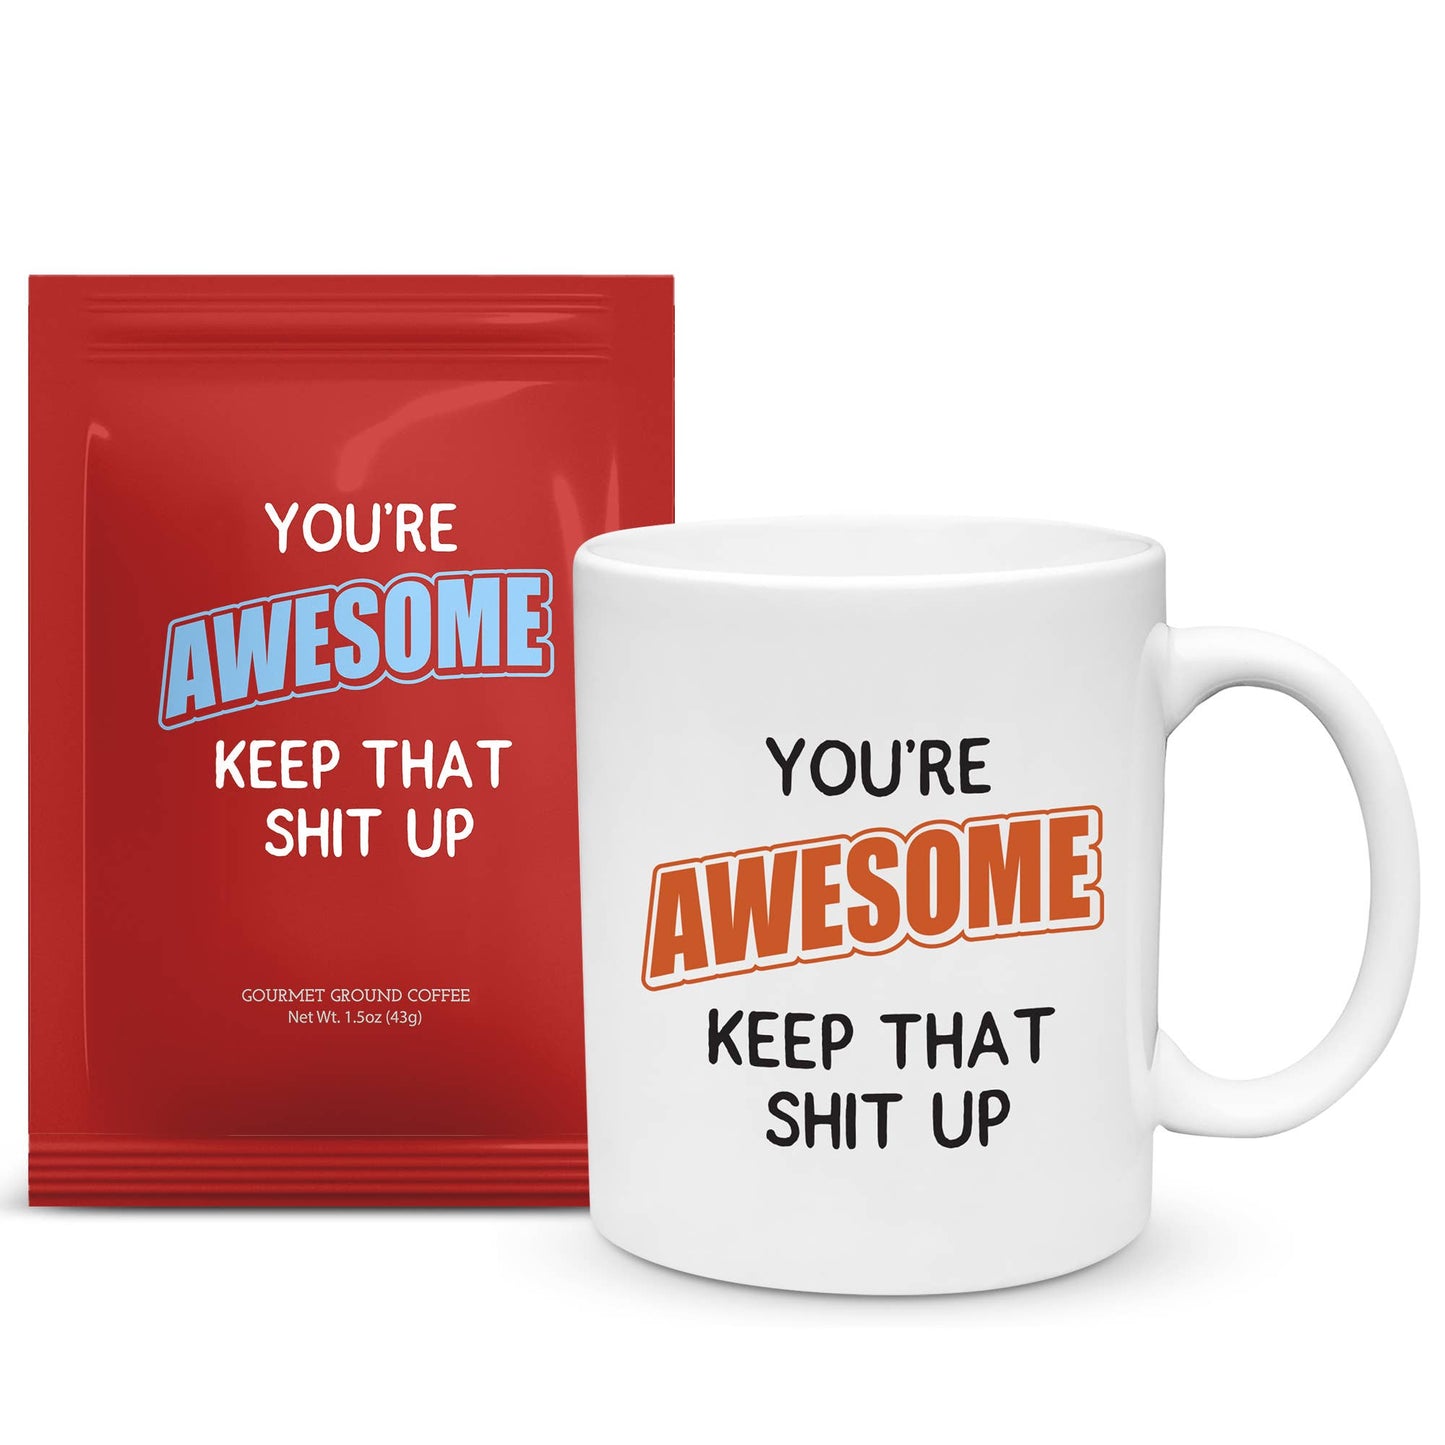 Swag Brewery - You're Awesome ....Mug and Ground Coffee Gift Set